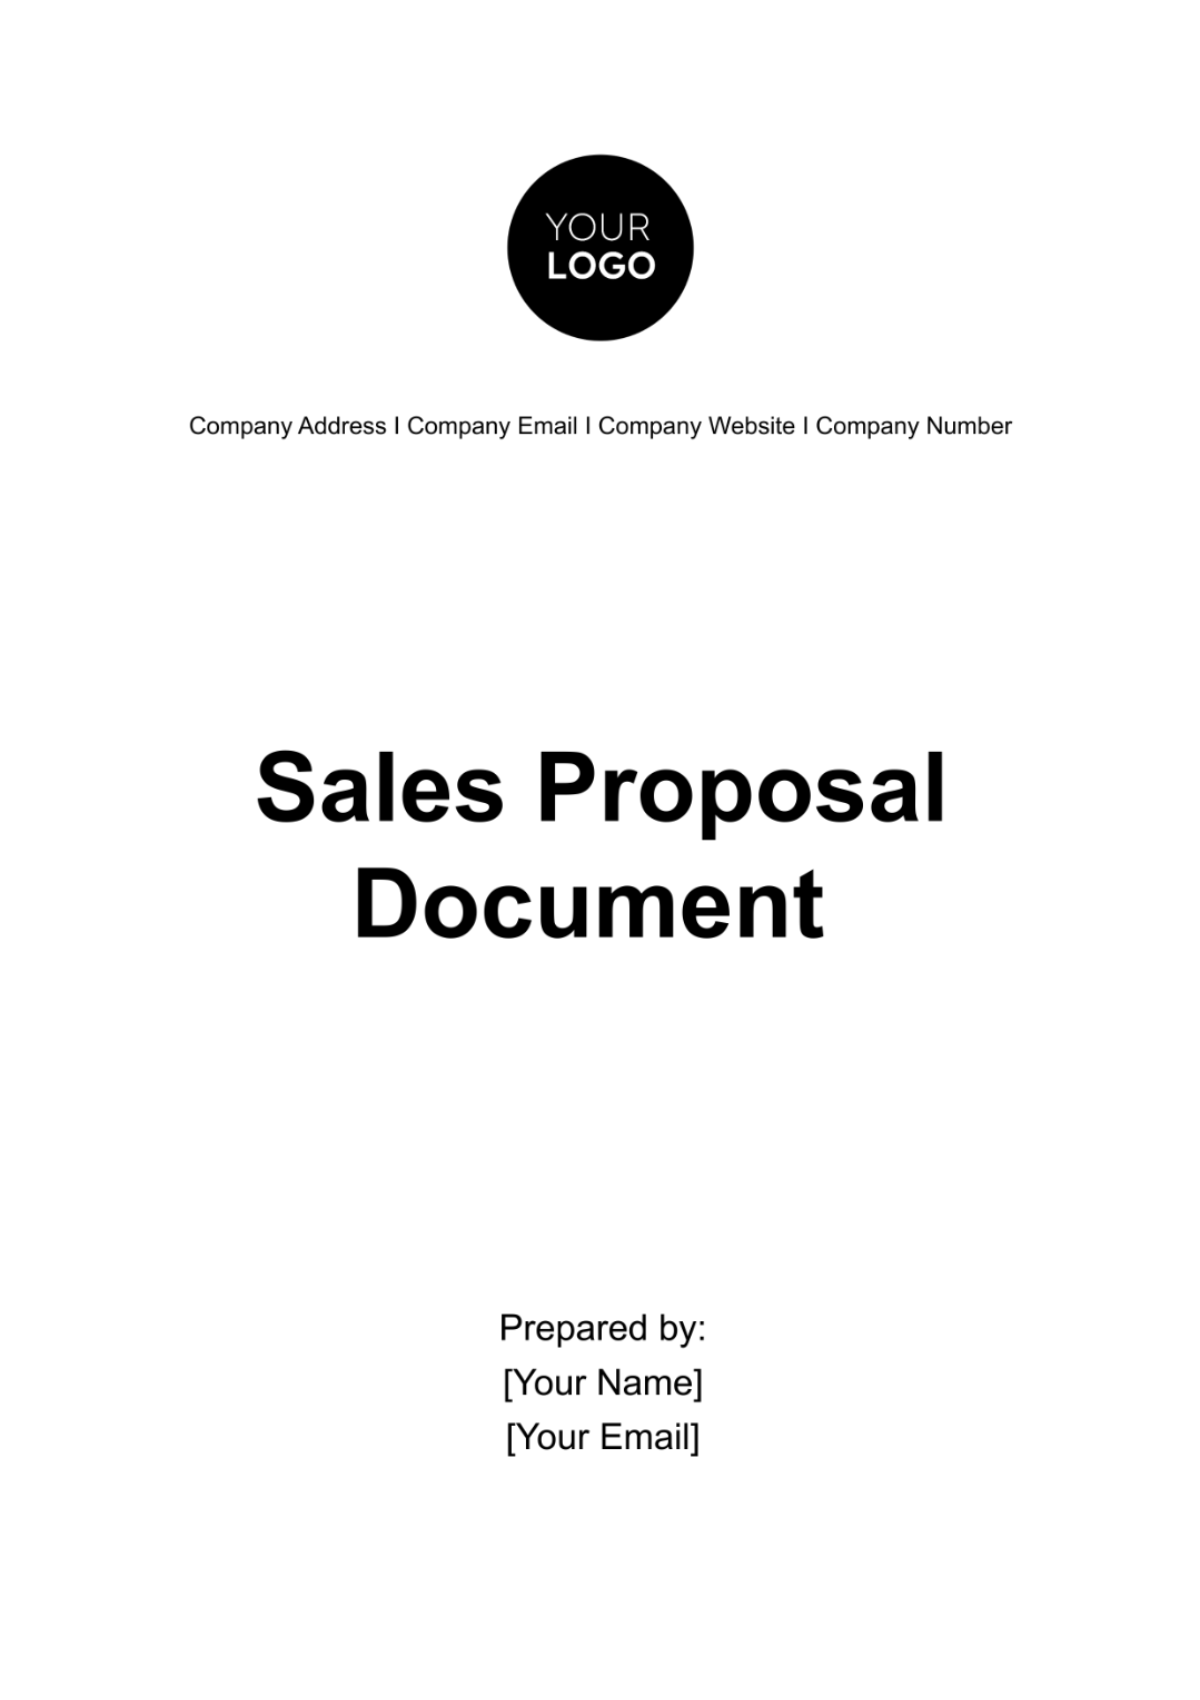 Free Sales Proposal Document Template